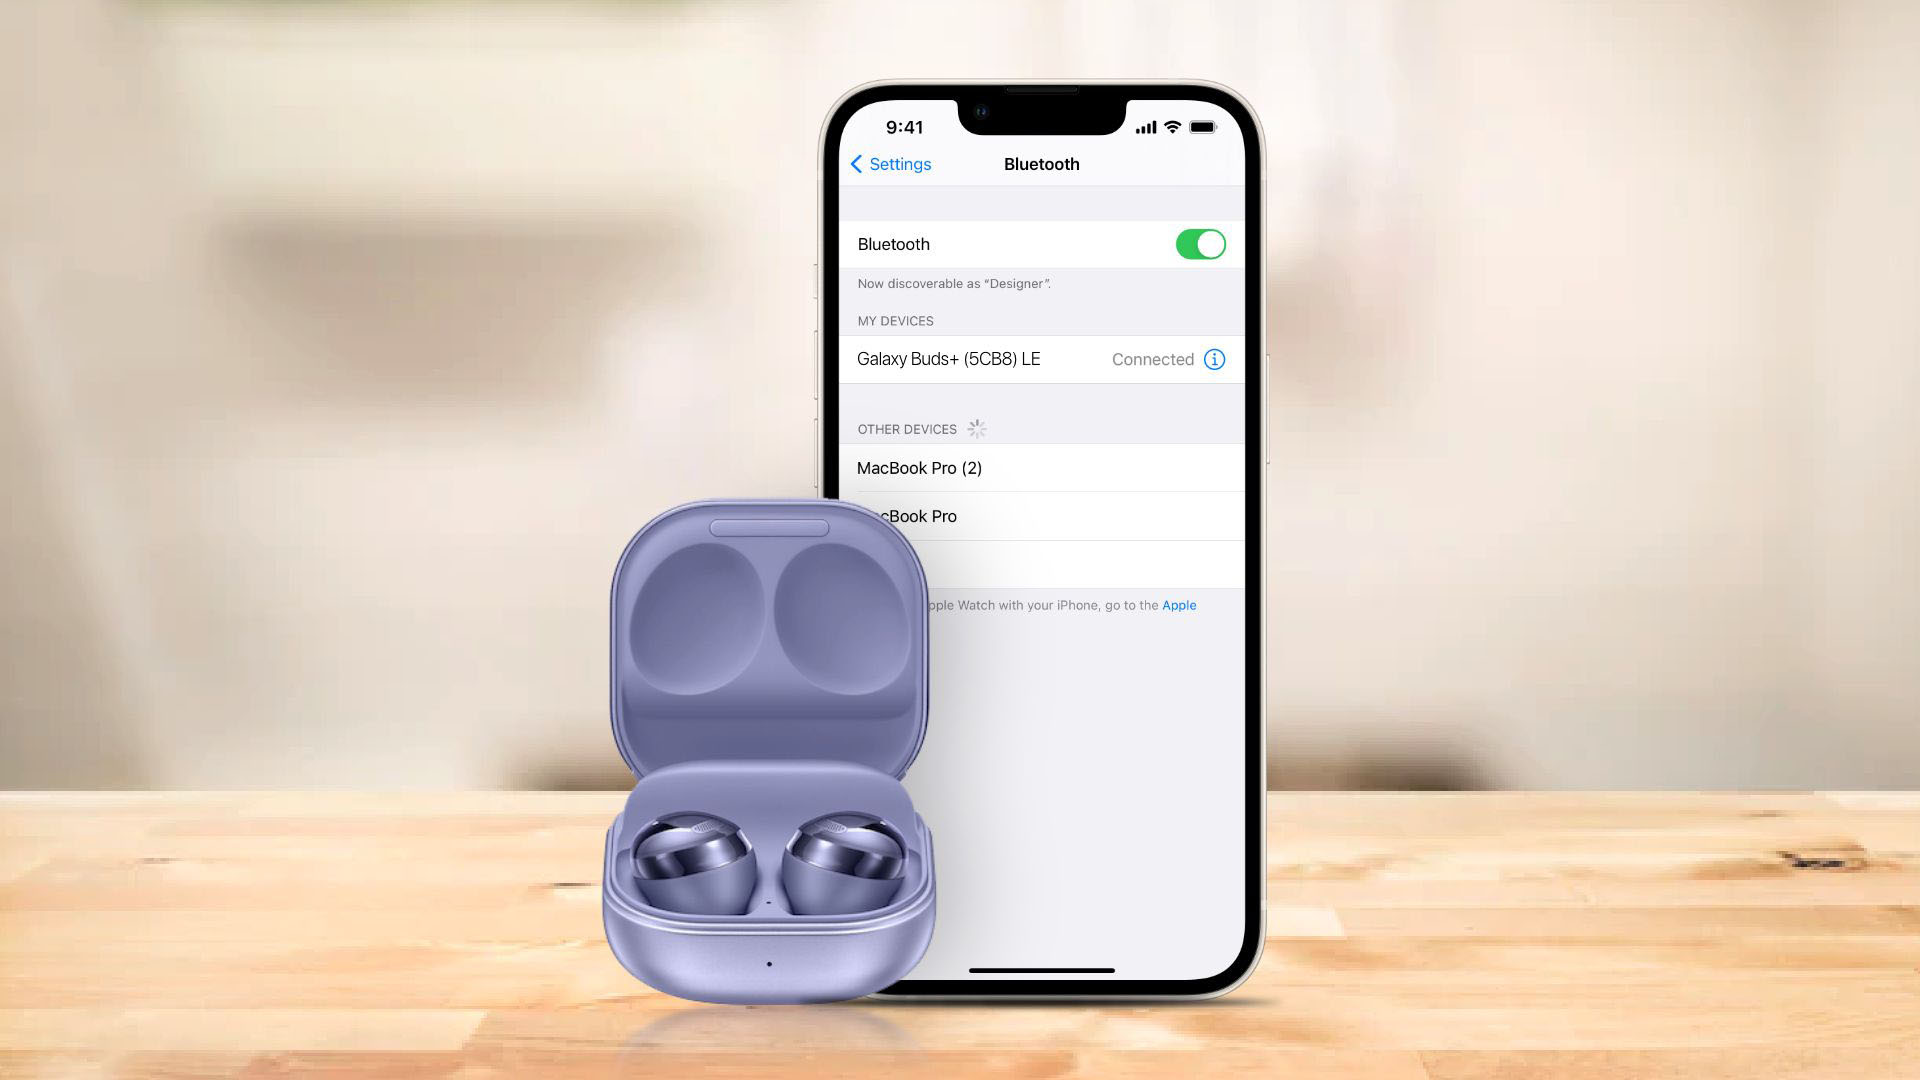 Process to connect Galaxy buds